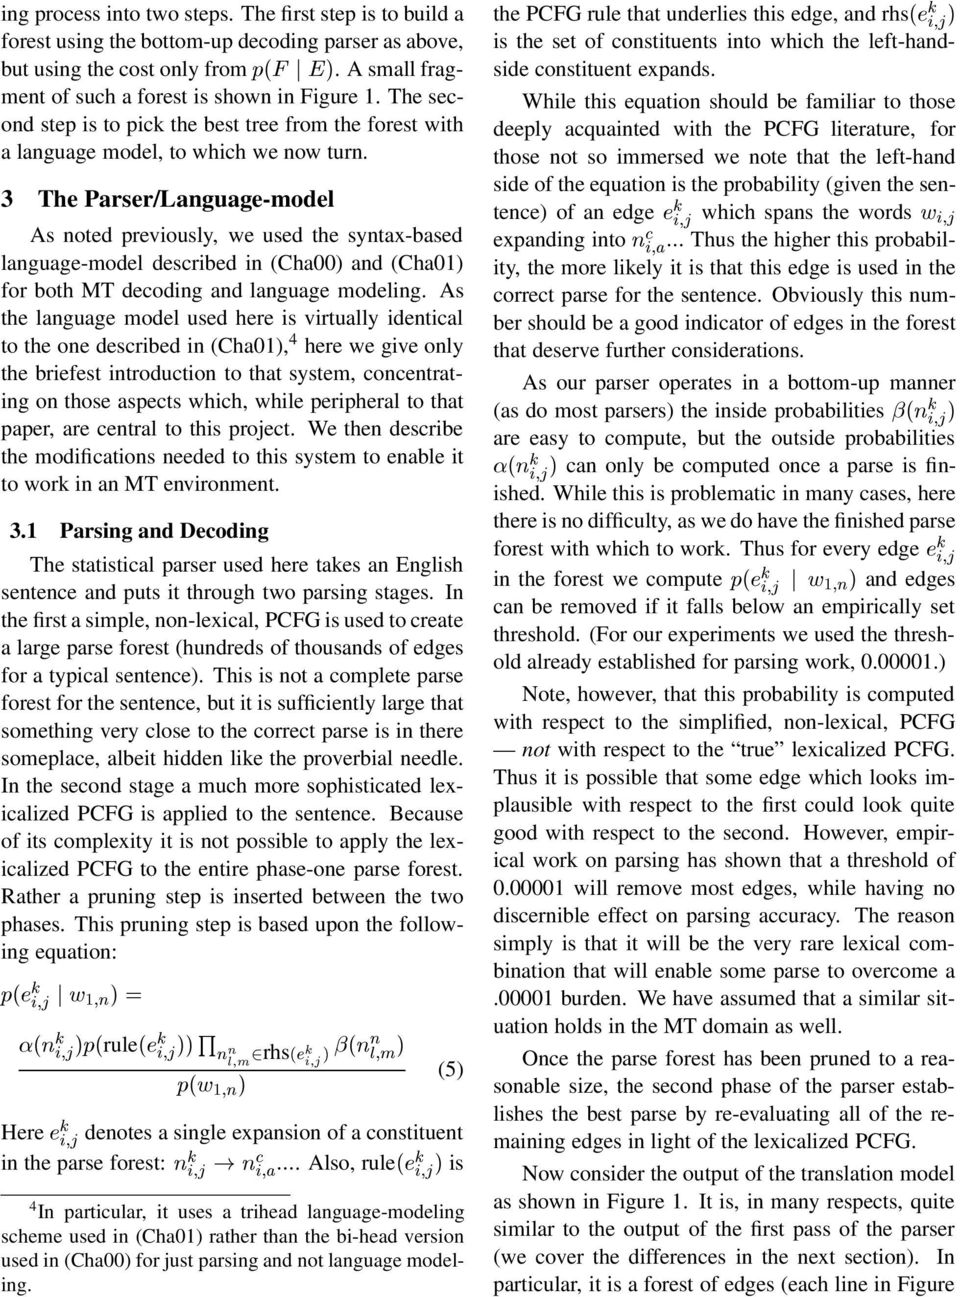 3 The Parser/Language-model As noted previously, we used the syntax-based language-model described in (Cha00) and (Cha01) for both MT decoding and language modeling.